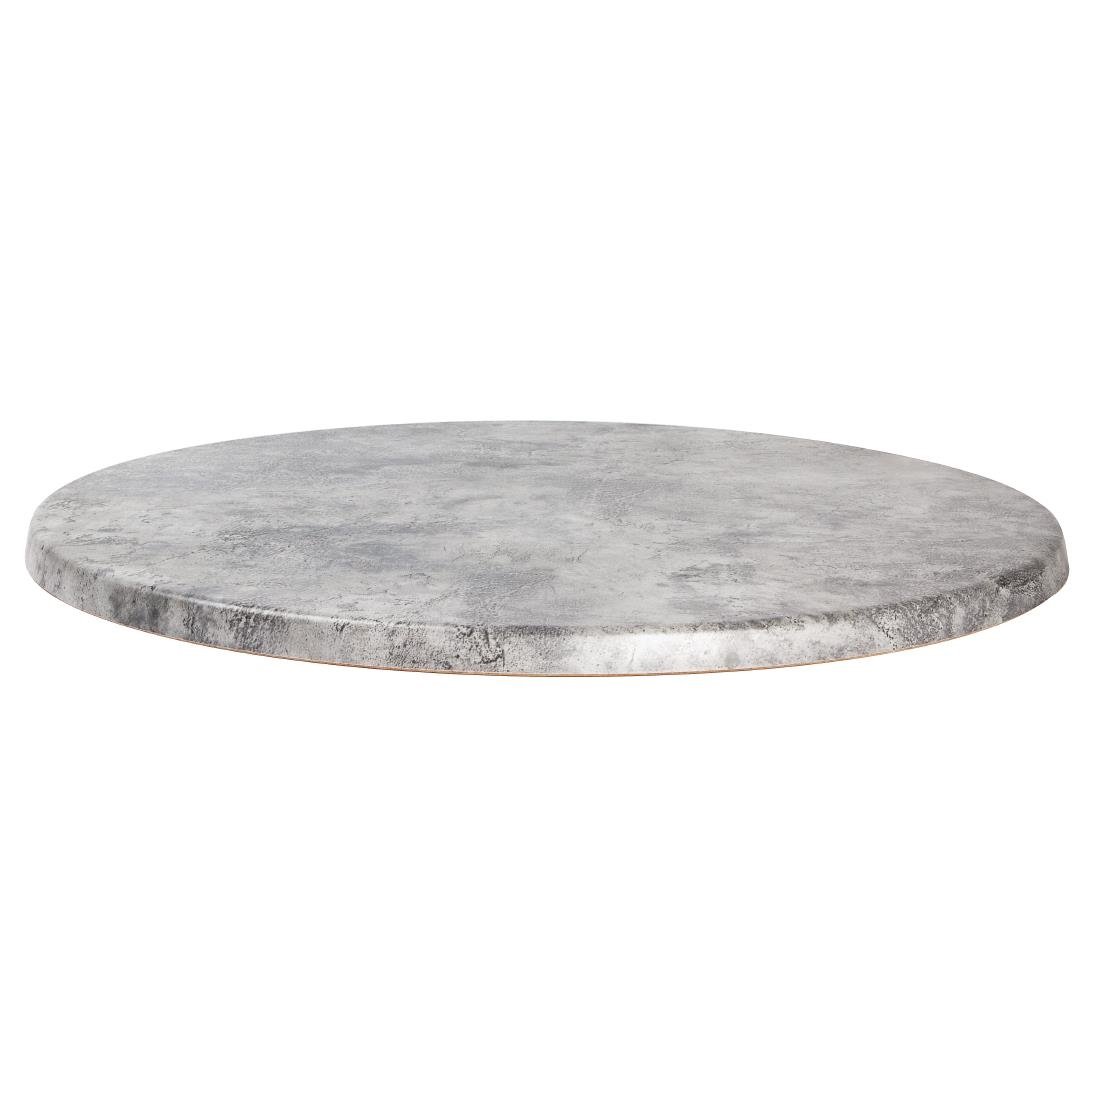 GR582 Werzalit Pre-Drilled Round Table Top City 241 700mm JD Catering Equipment Solutions Ltd